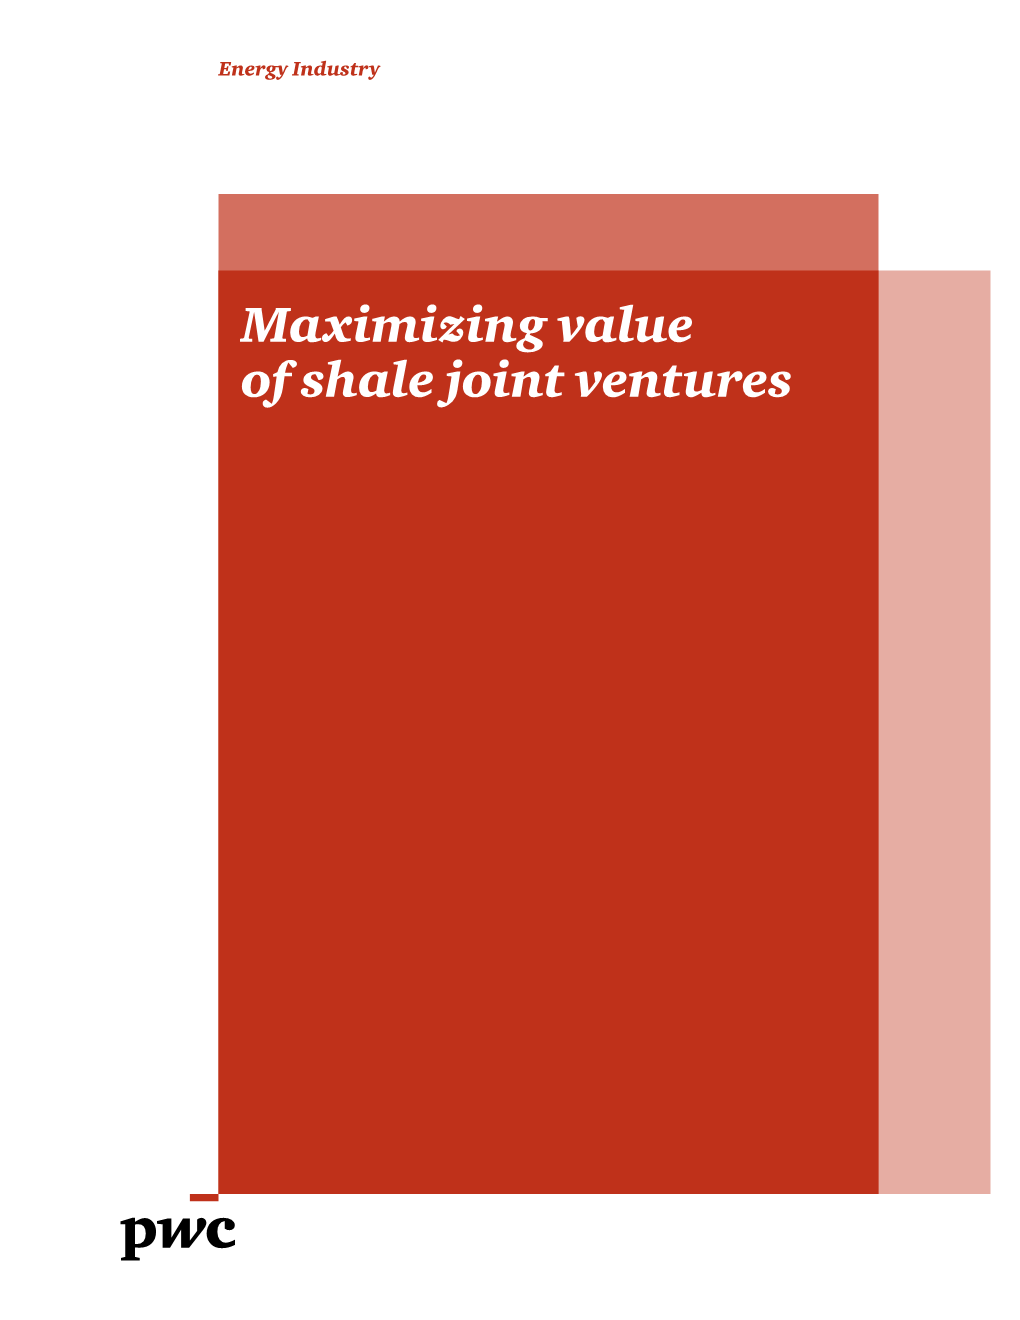 Maximizing Value of Shale Joint Ventures